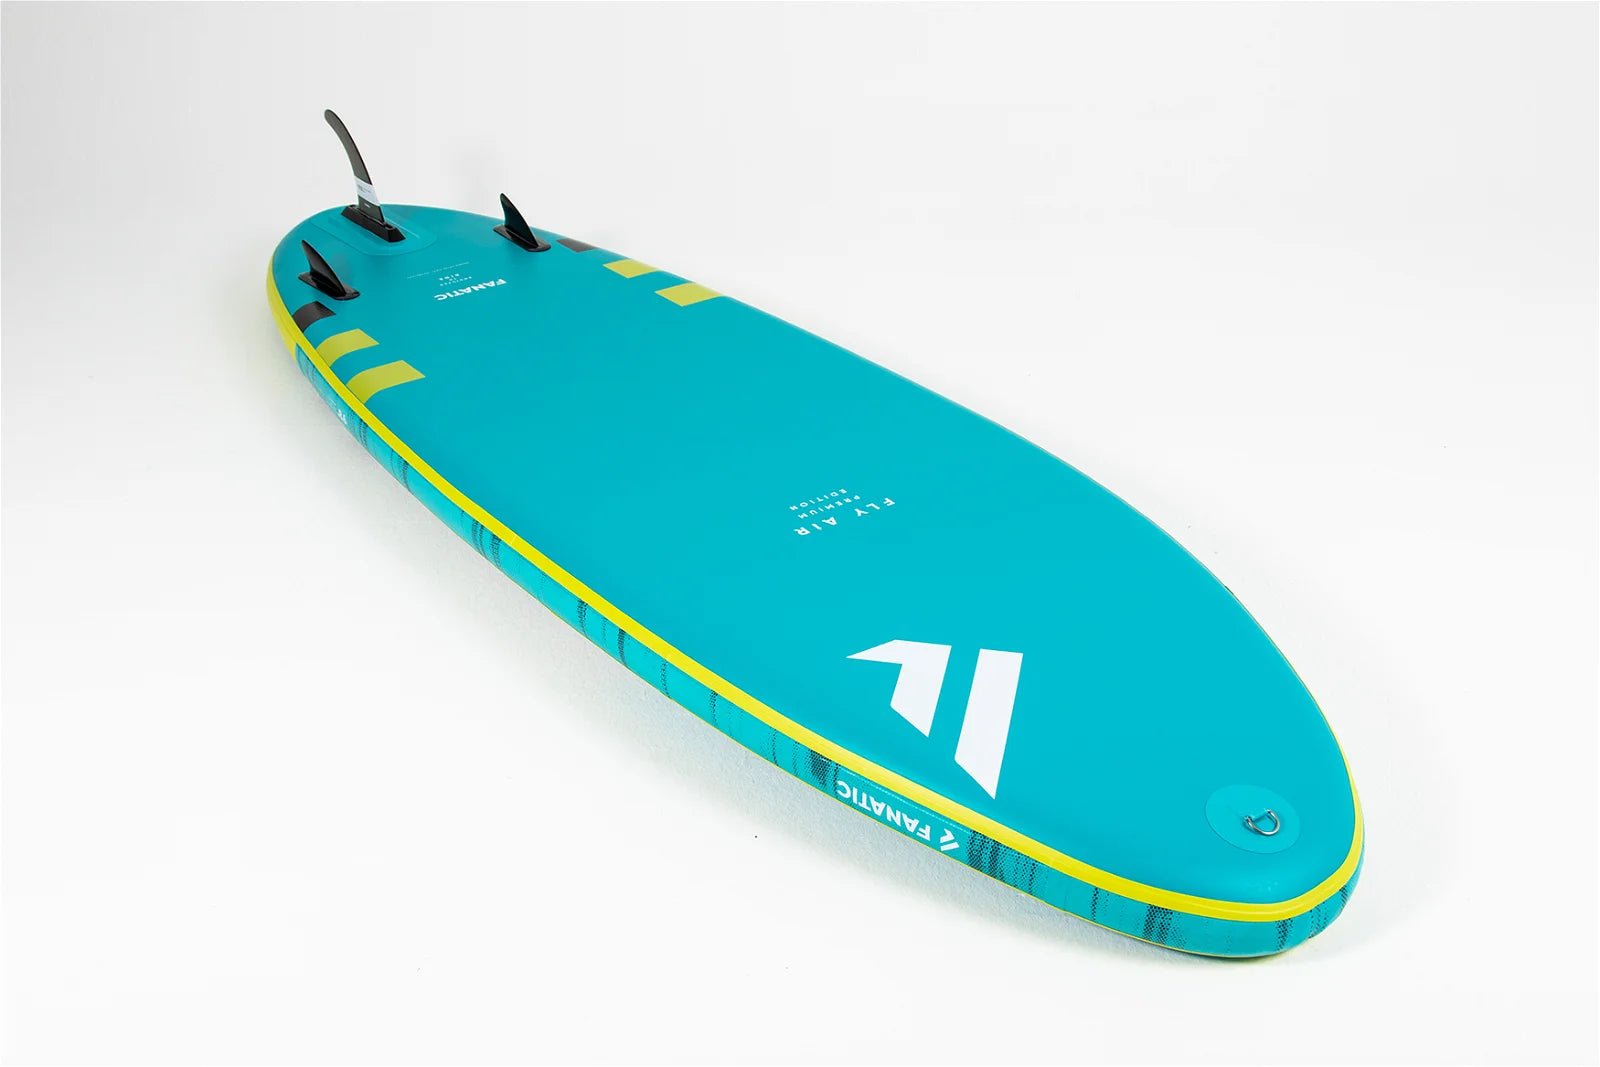 Fanatic Package Fly Air Premium/C35 2022 iSUP Paddleboard - Worthing Watersports - 9008415938421 - iSUP Packages - Fanatic SUP